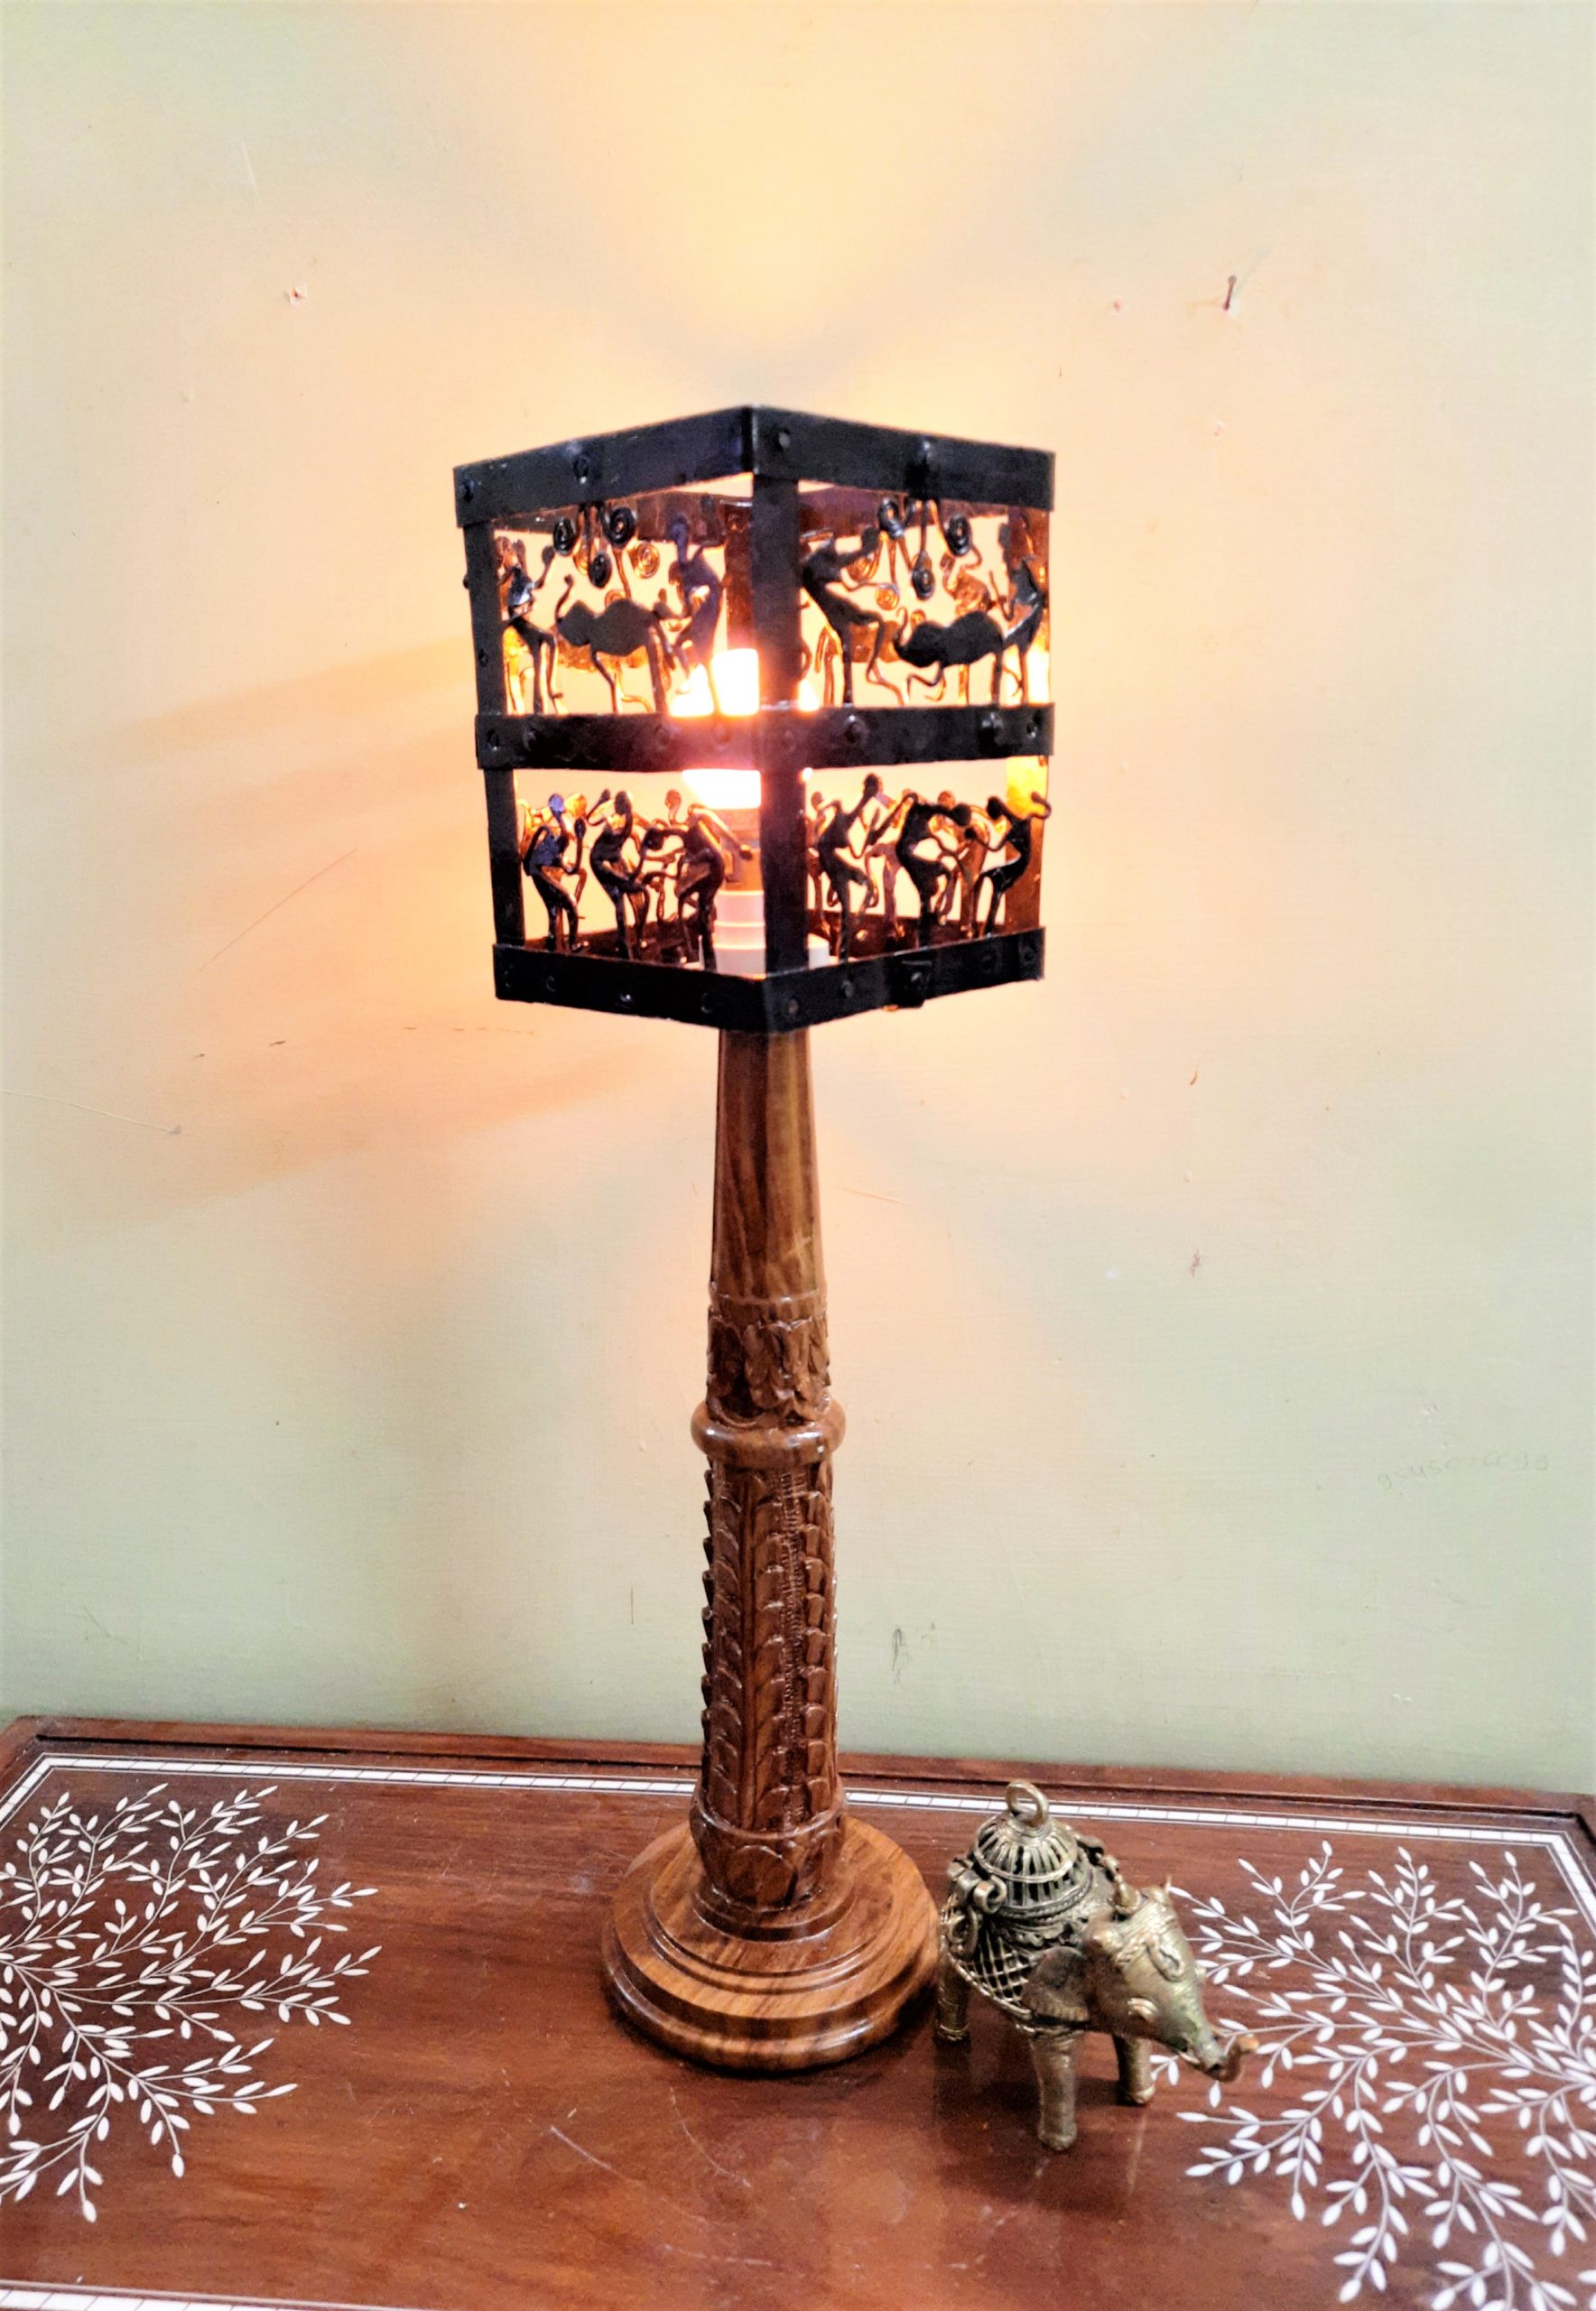 Aesthetic Hand Crafted Table Lamp - Hasthkala